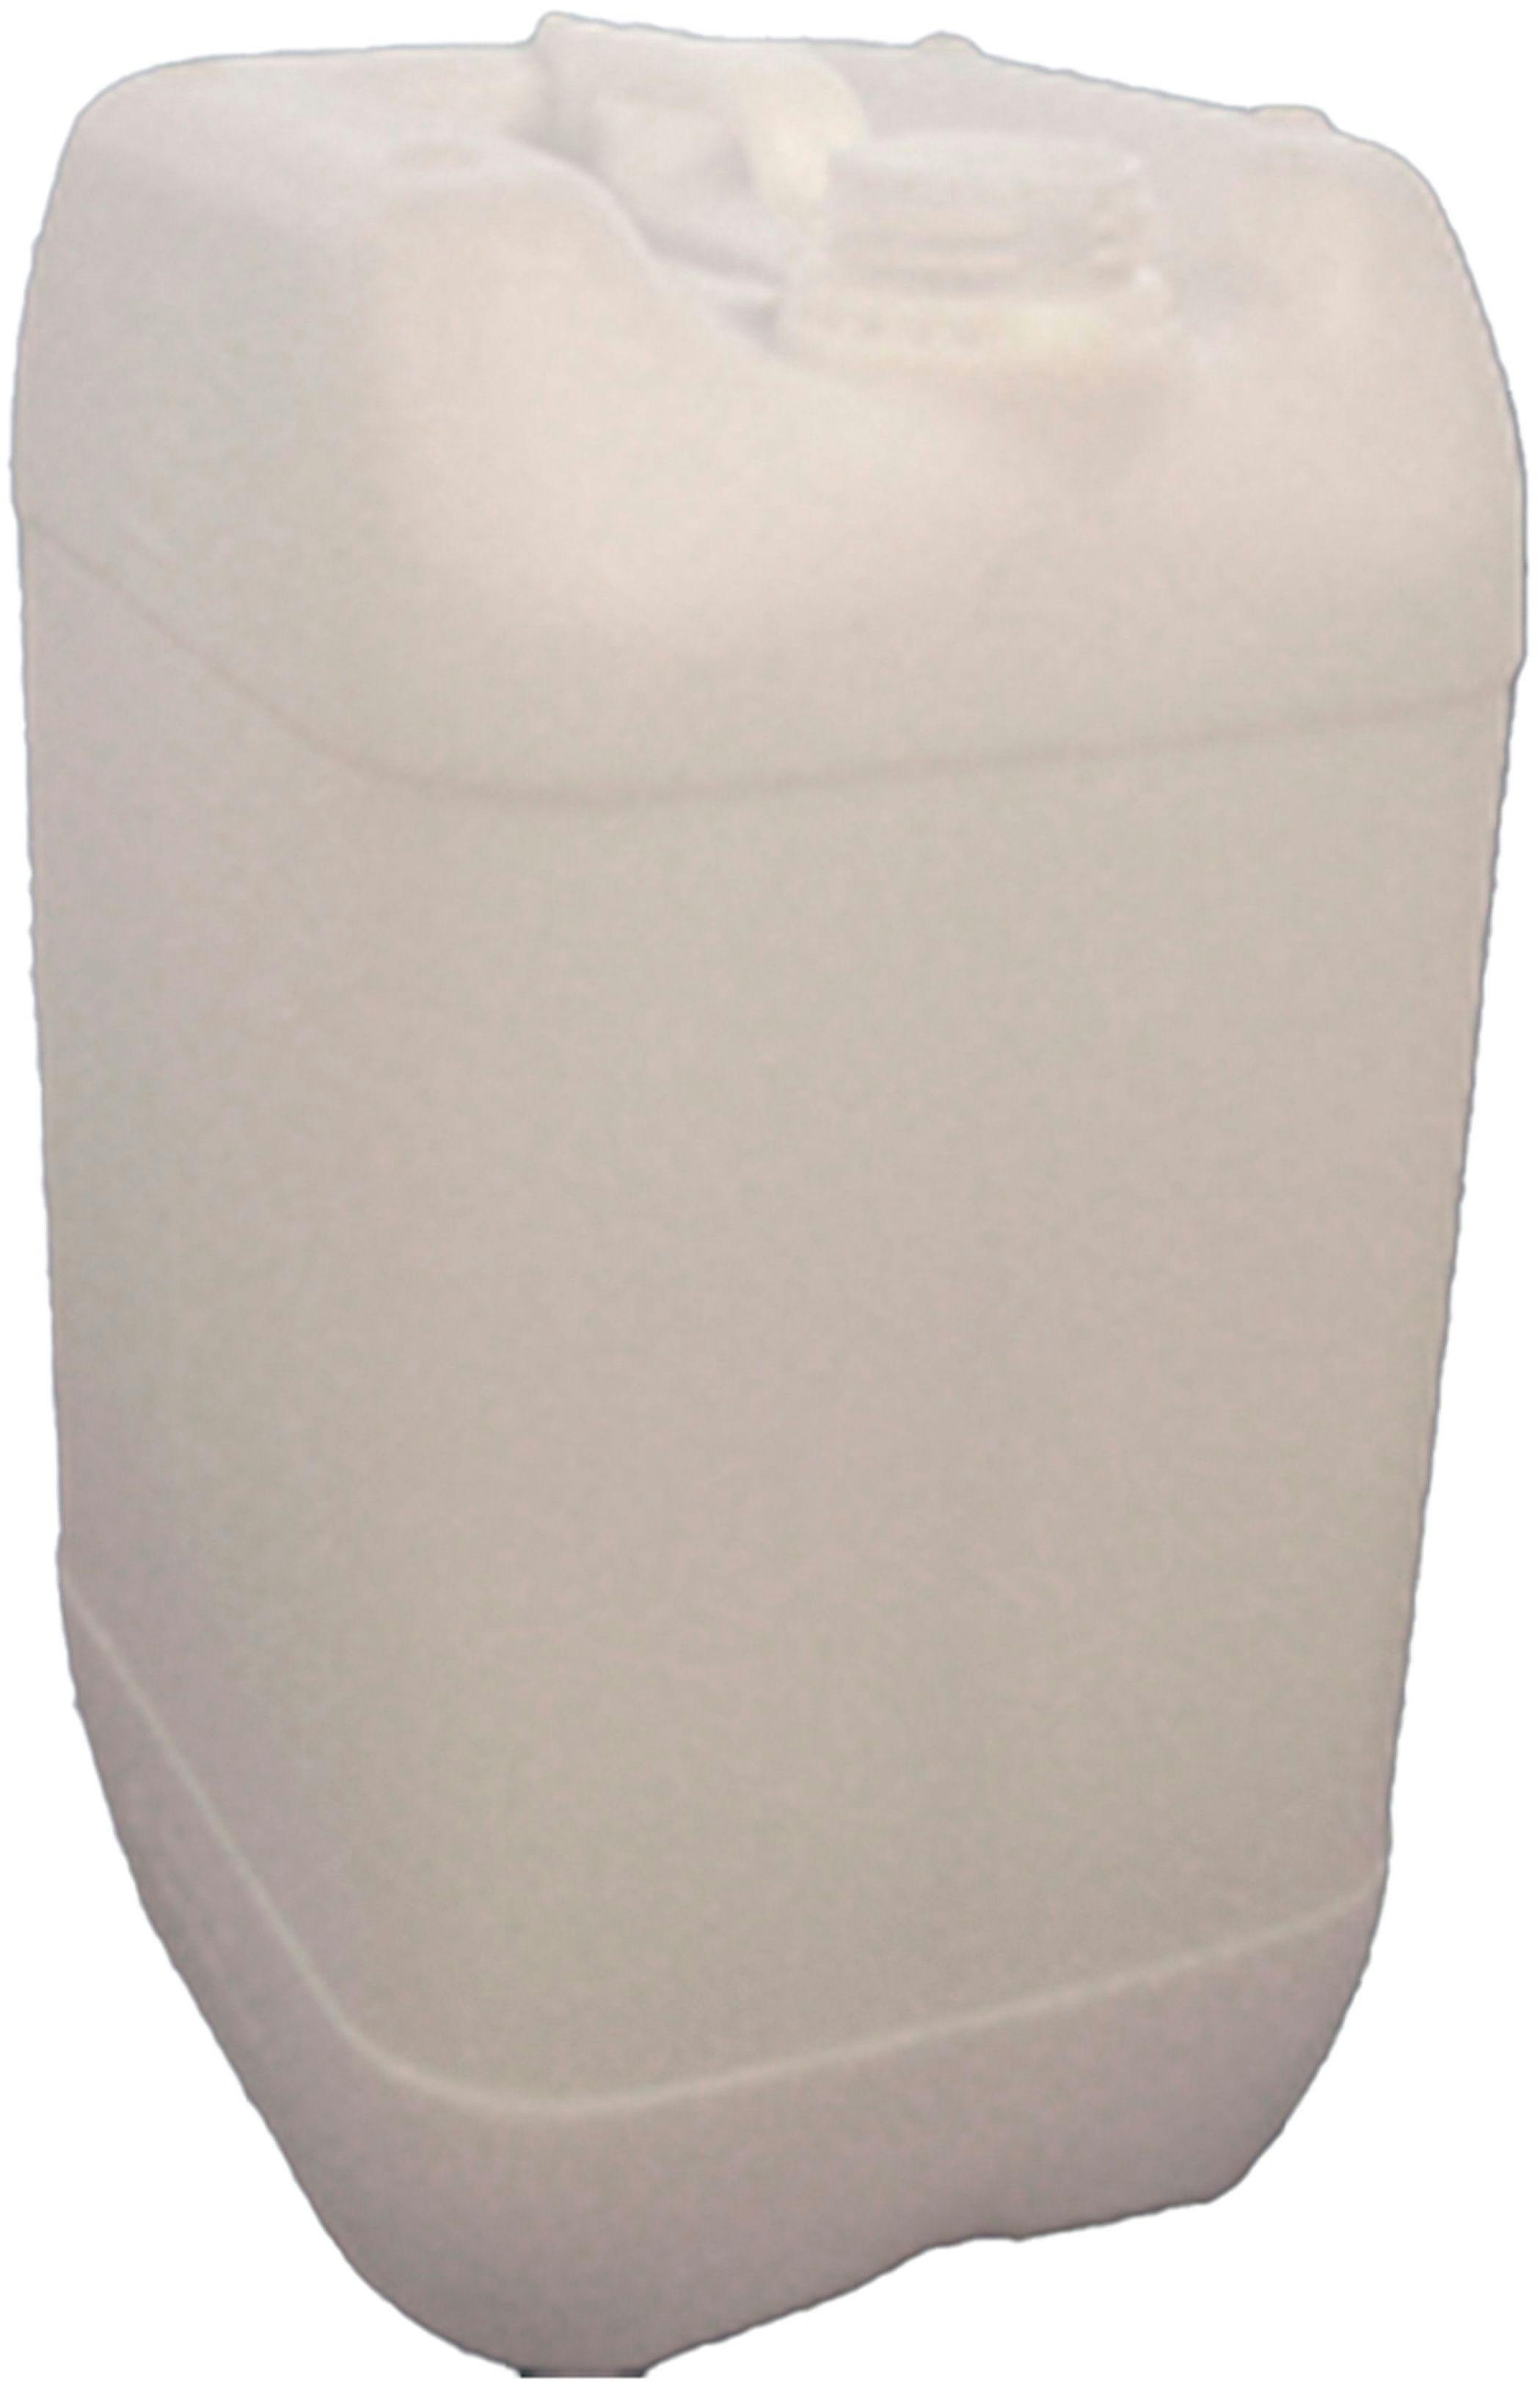 Jerrican stackable HDPE 25 liters natural approved J-CAP40 D61